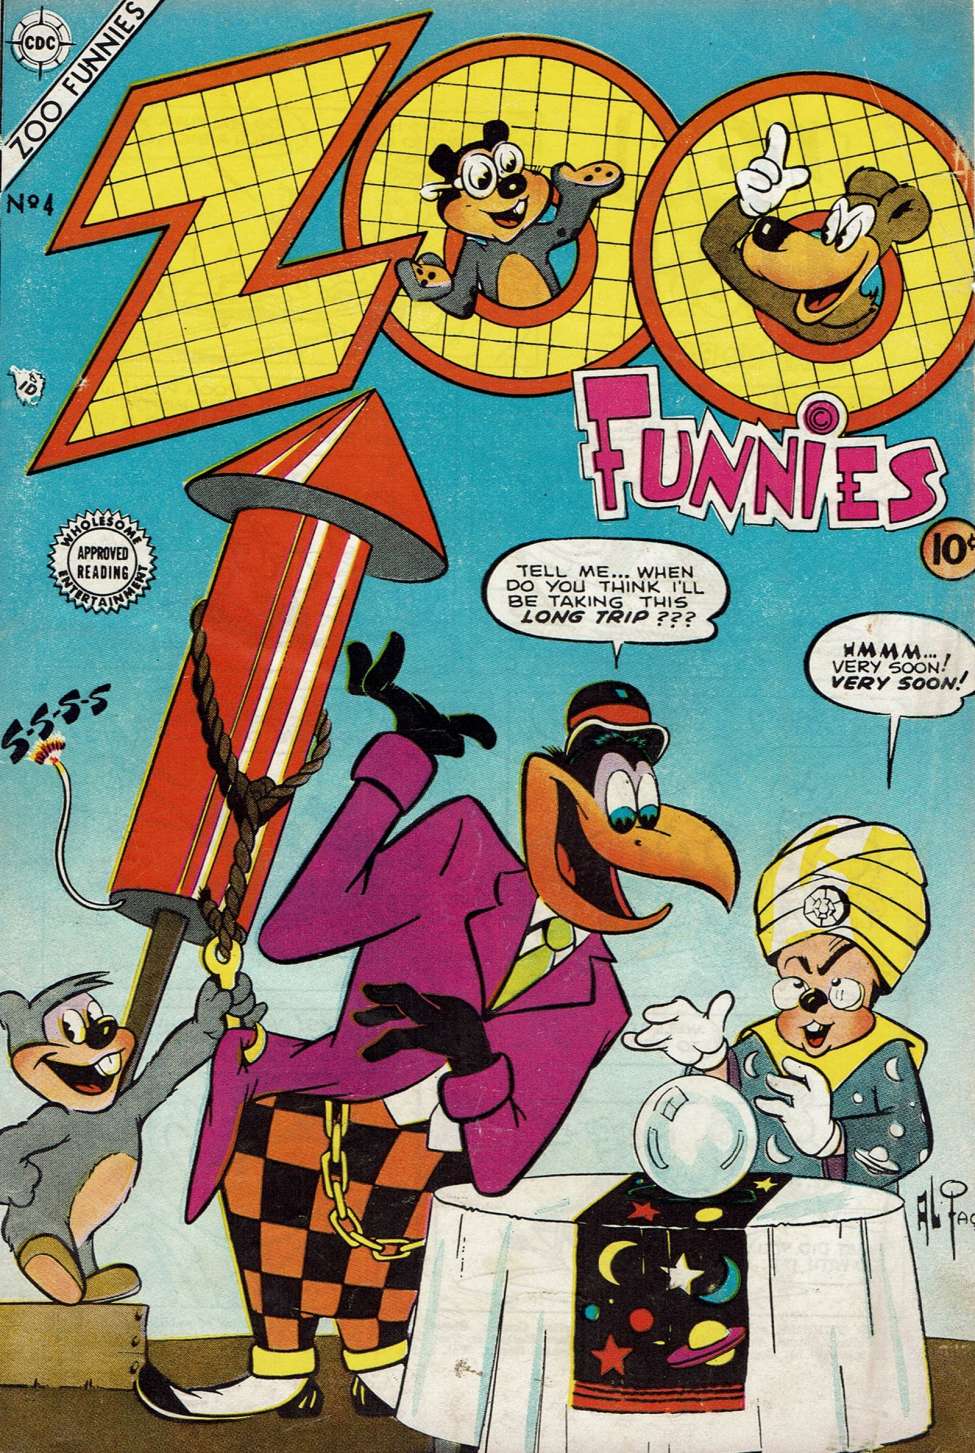 Book Cover For Zoo Funnies v2 4 - Version 2